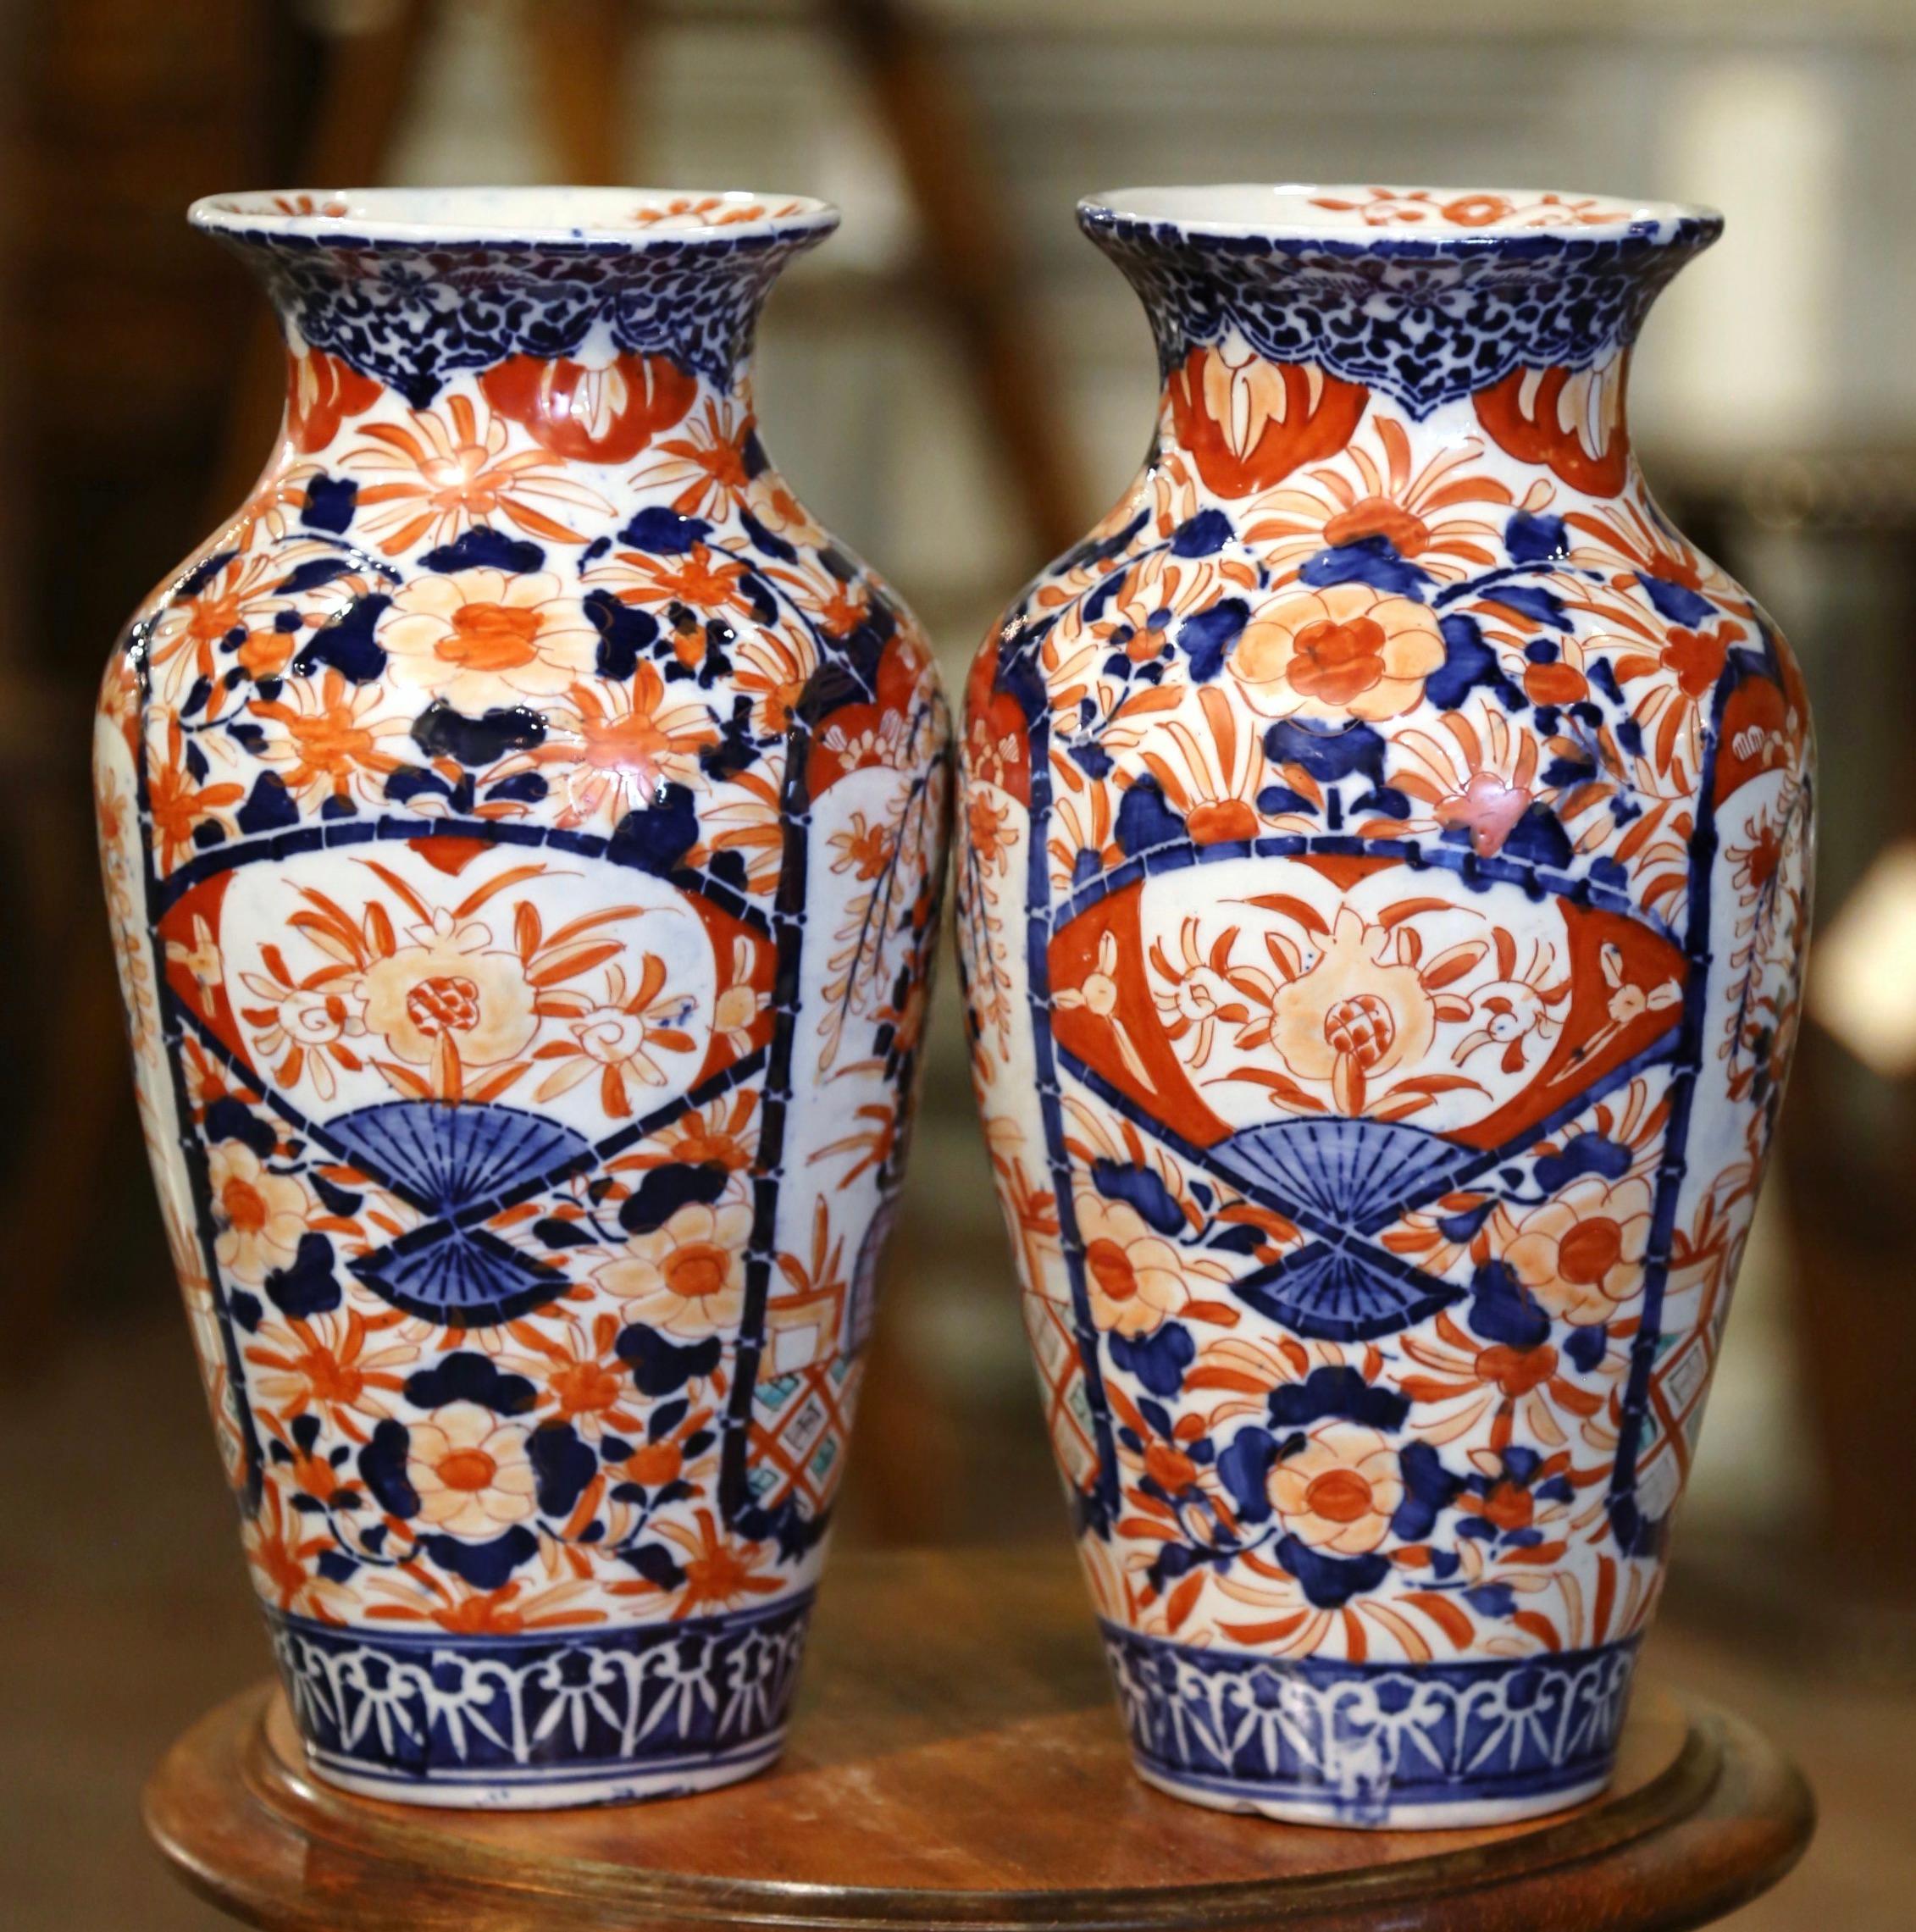 Pair of 19th Century Japanese Porcelain Imari Vases with Floral and Plant Decor For Sale 4